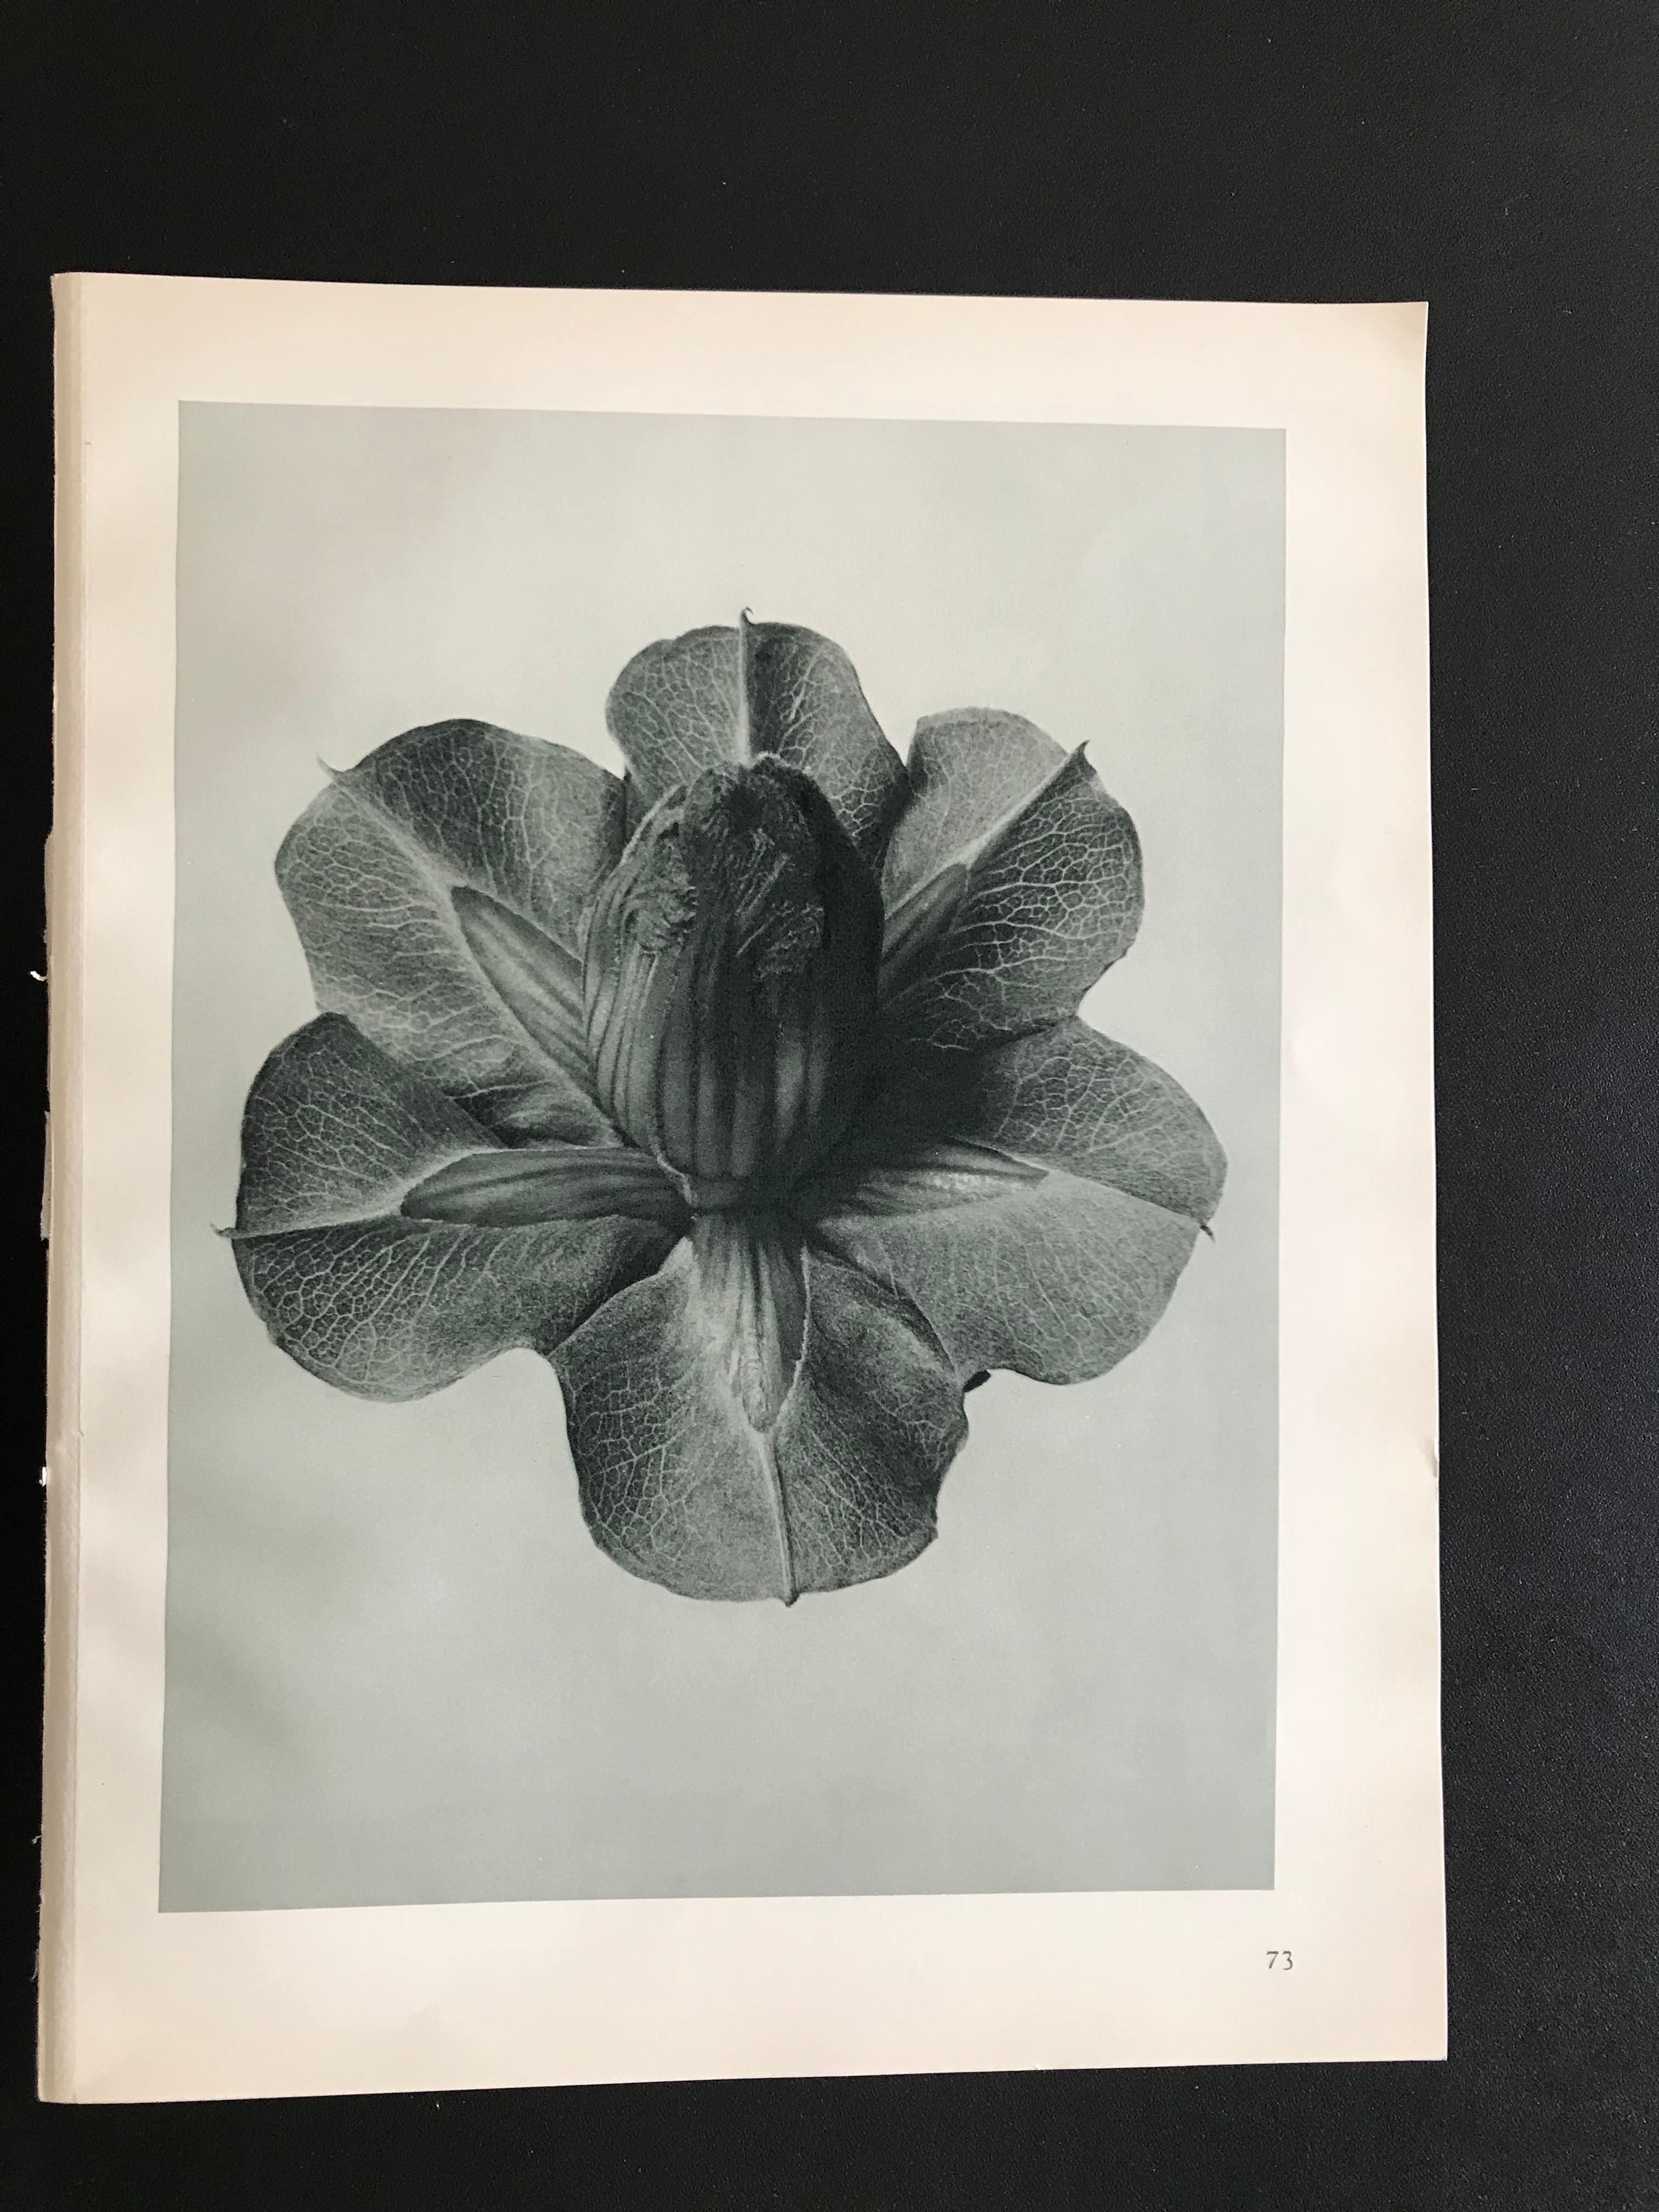 12 botanical photogravures by Karl Blossfeldt (German, b. 1914 - d. 1932), First Edition 1928, Berlin. Blossfeldt was a well-known artist, teacher, sculptor and photographer; best known for his closeup photographs of plant life. Hung together, these